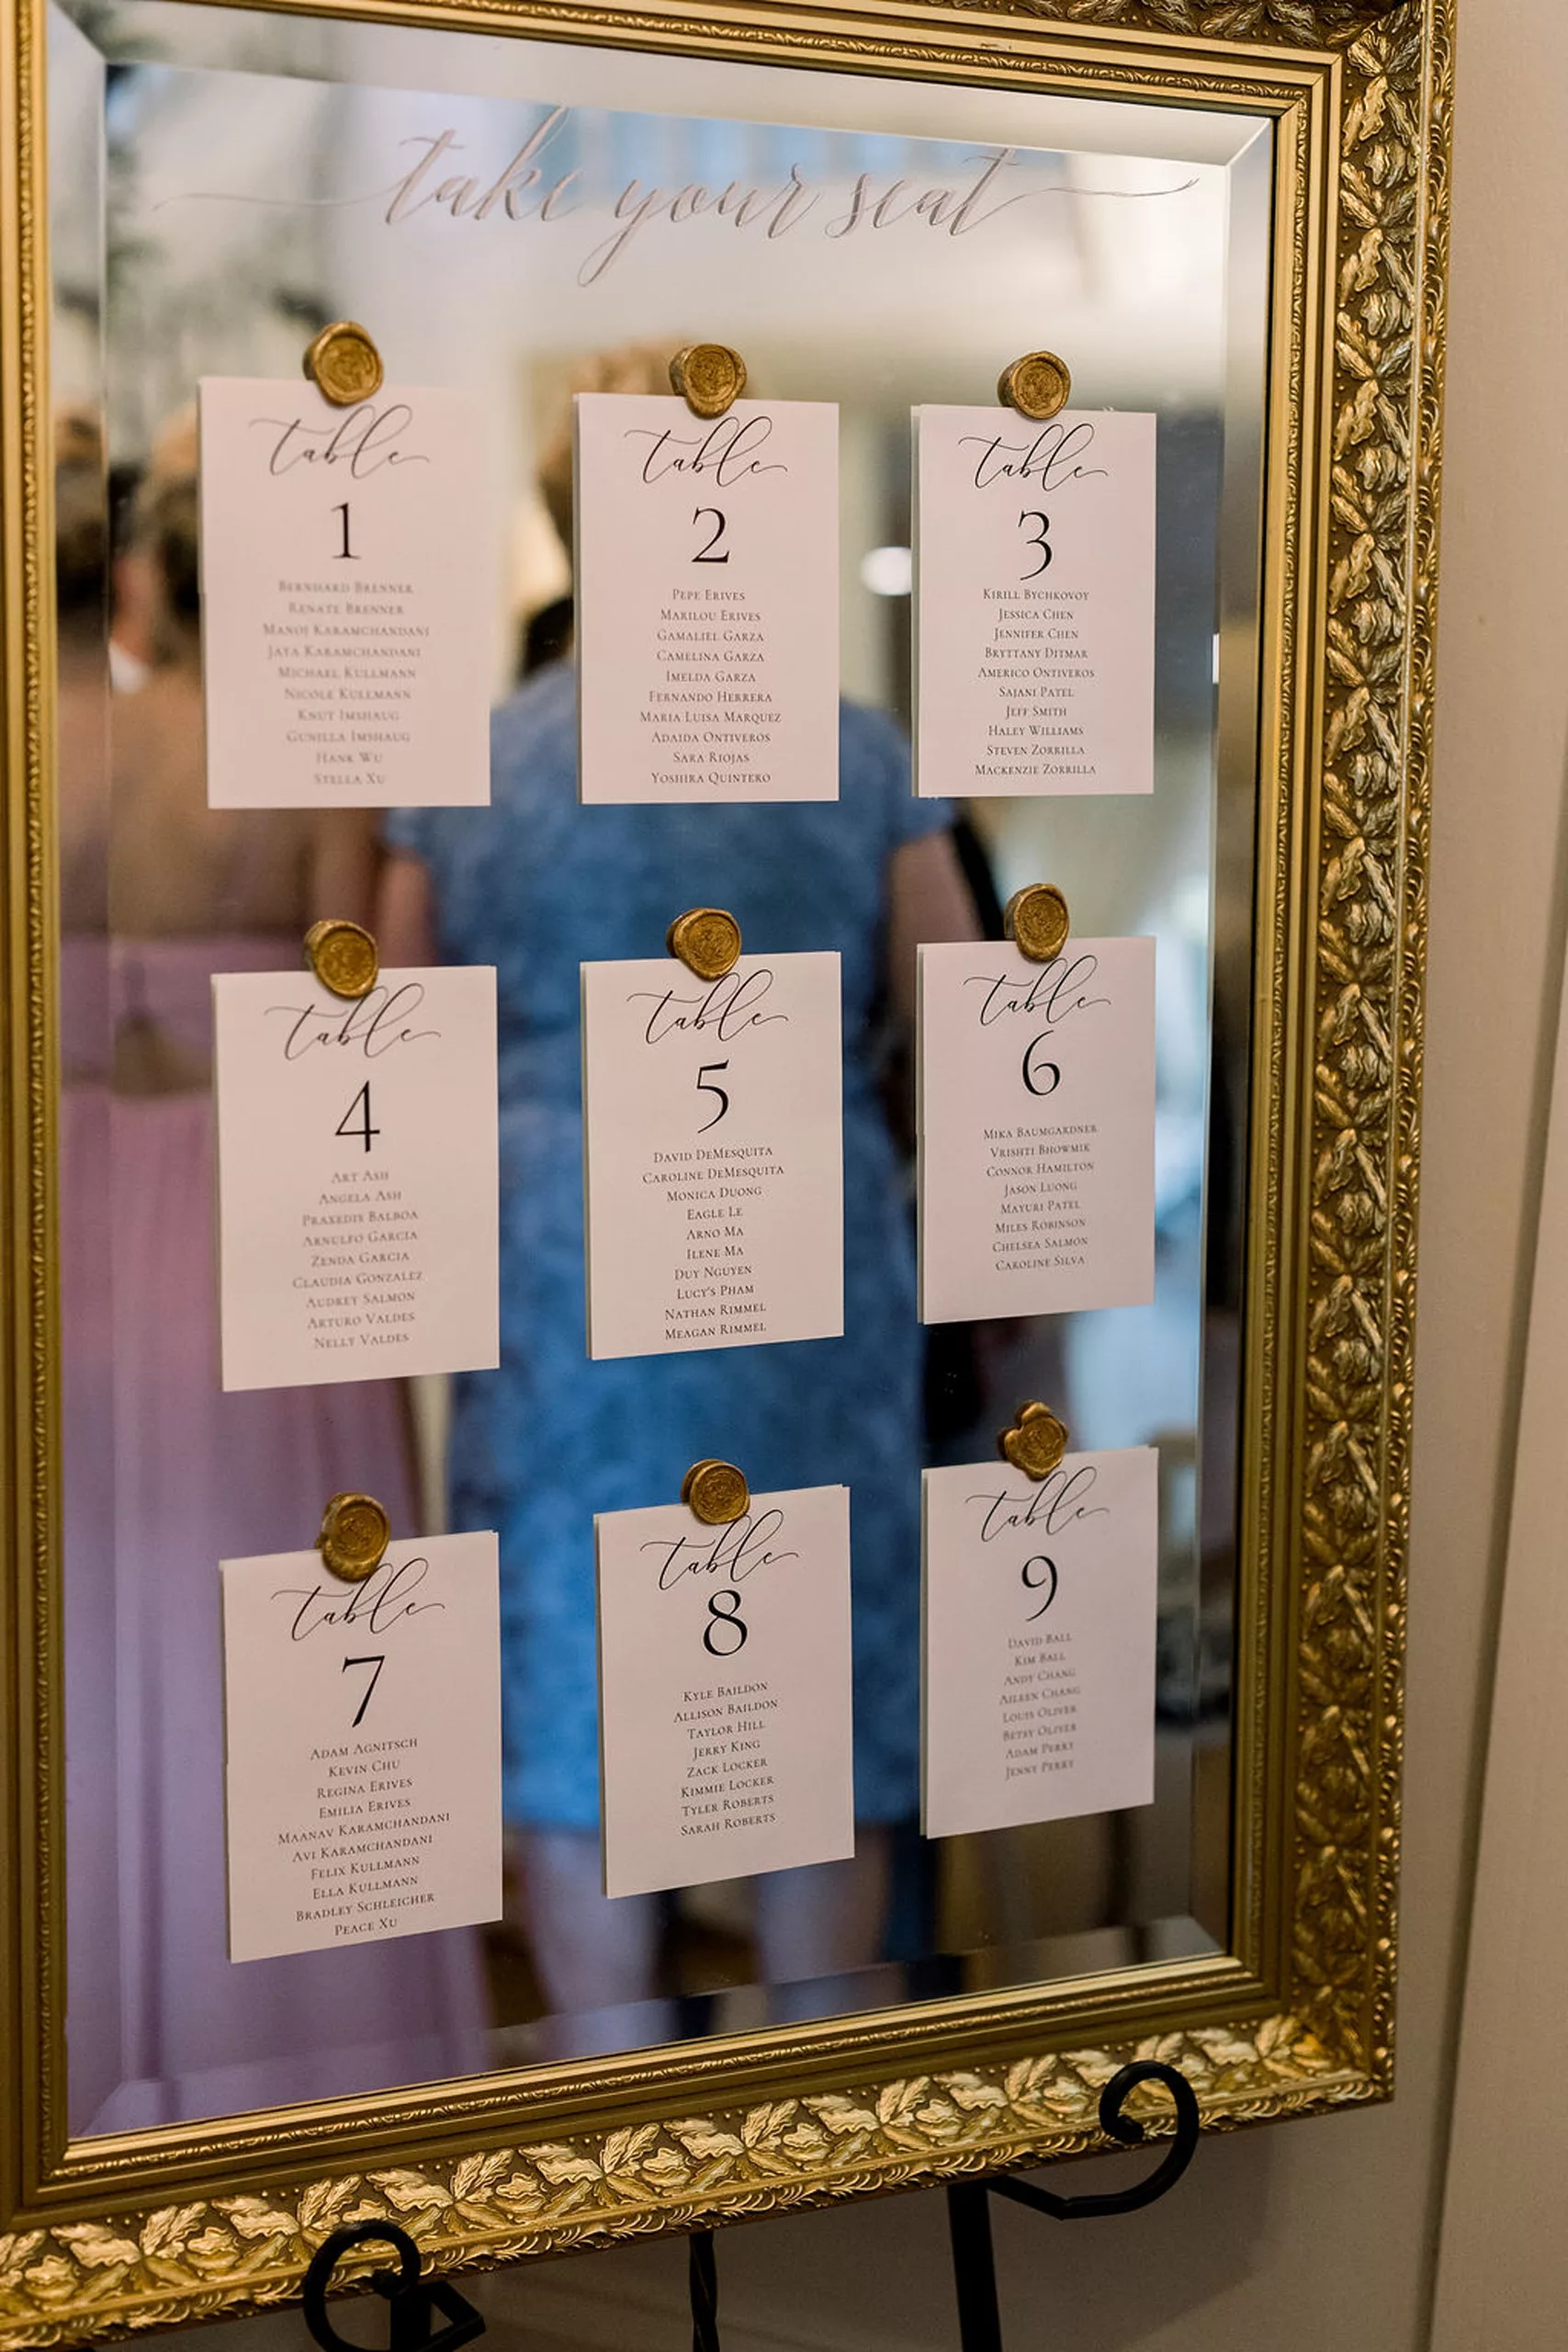 Details of a mirror with table assignments wax-stamped onto it at a payne-corley house wedding